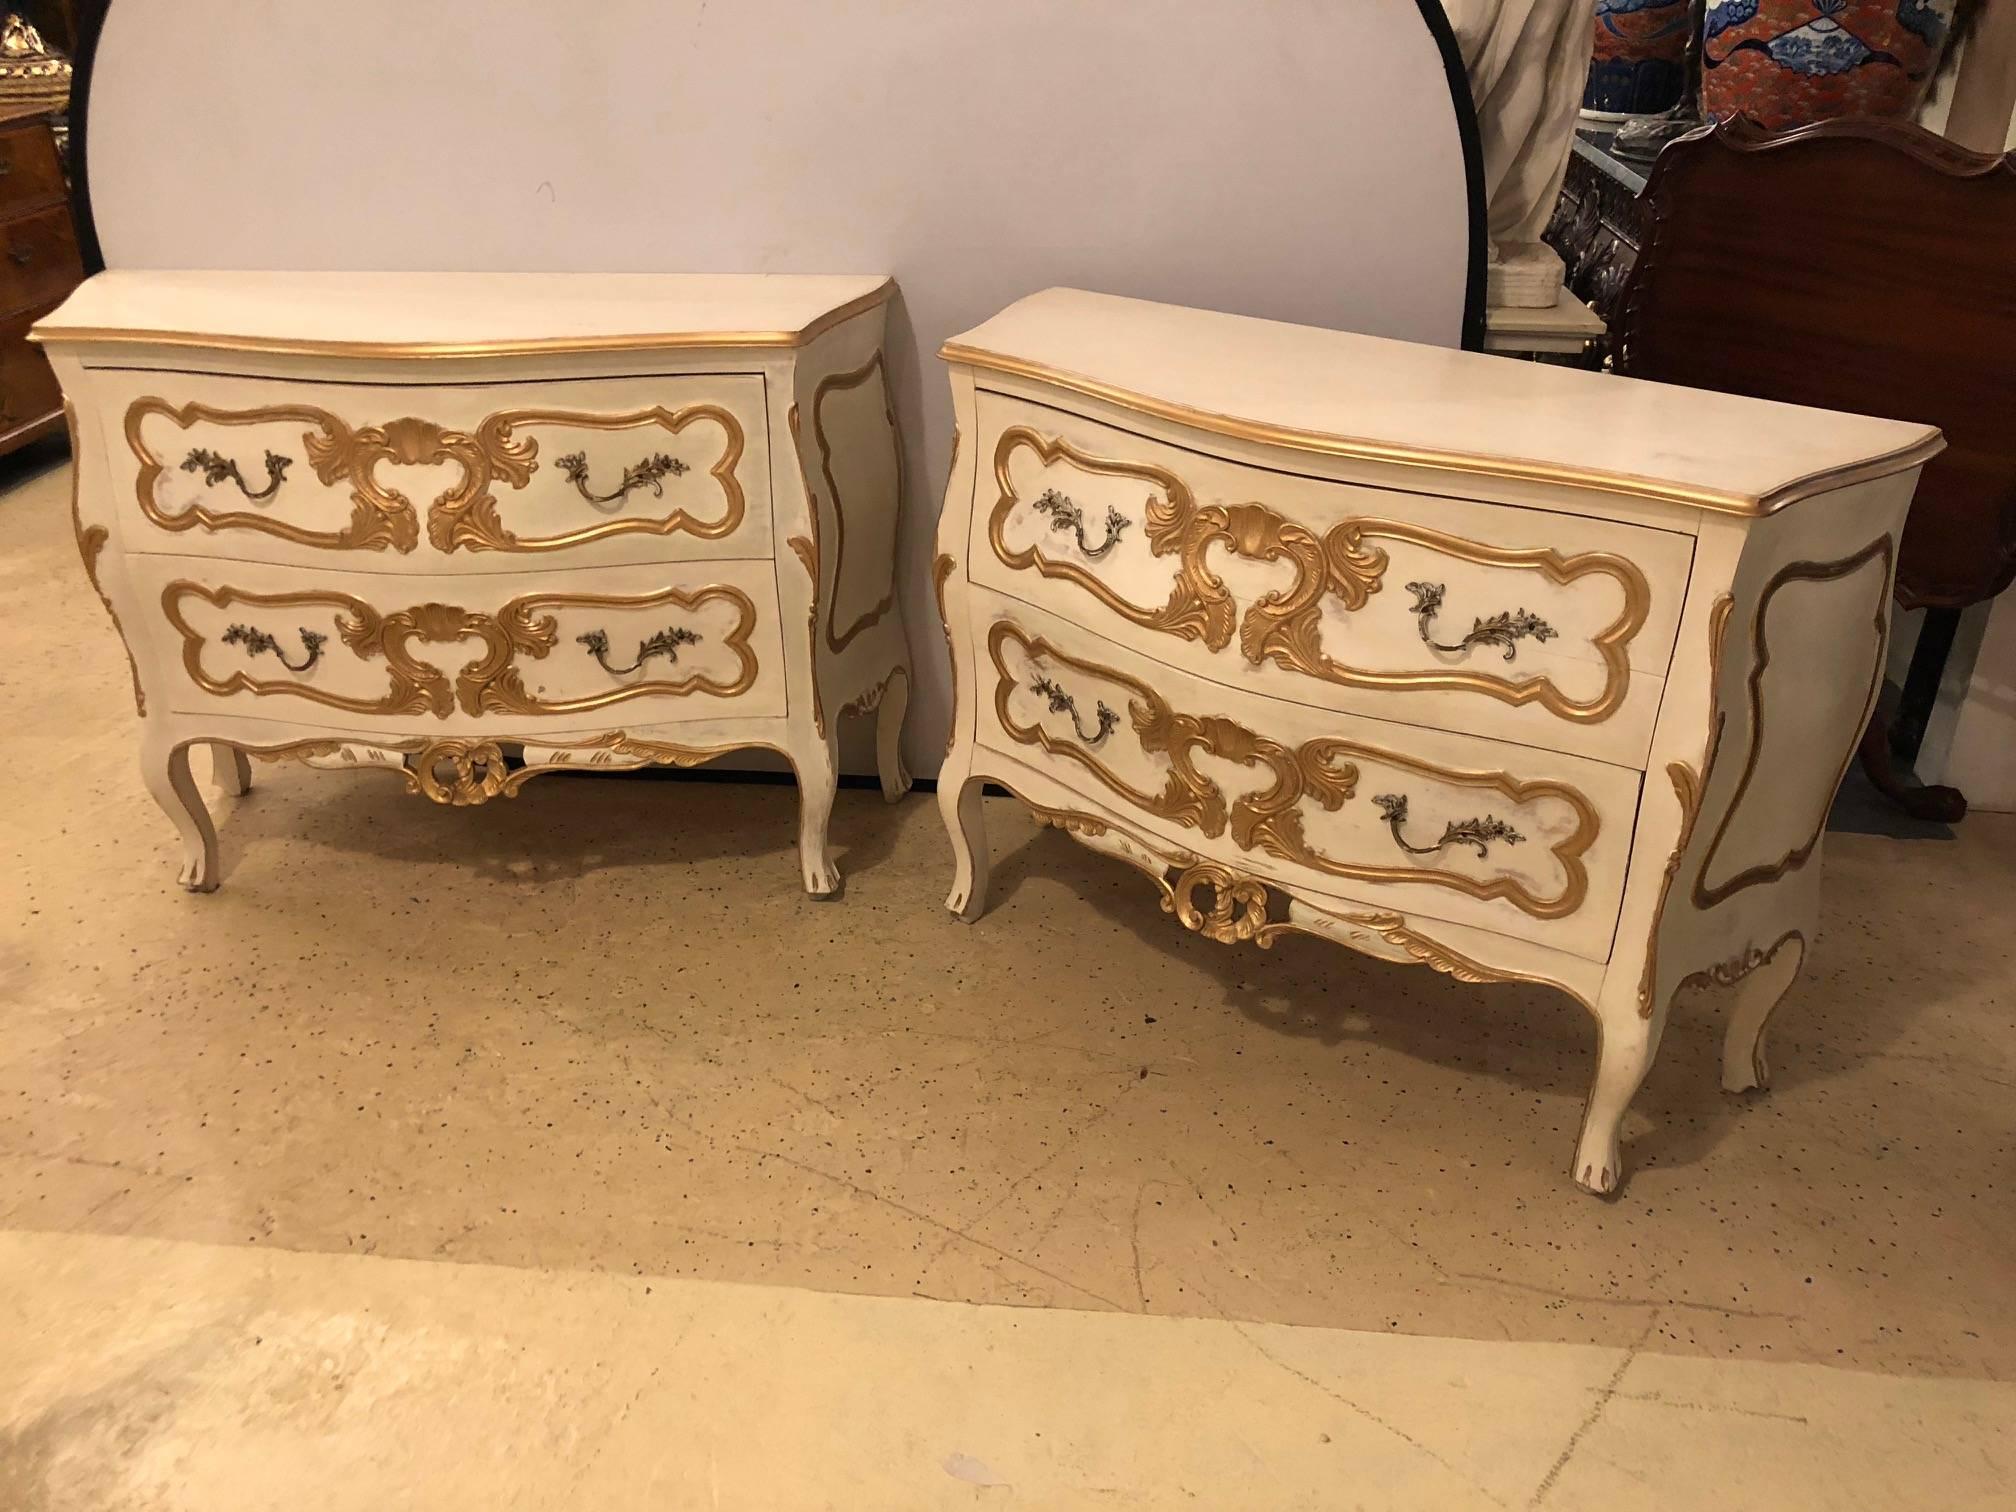 A very fine antique pair of bombe commodes or nightstands having a parcel paint and gilt decorated finish. These Italian delights are sure to make any room sparkle. The heavy gilt overlay on these Louis XV style commodes with bombe sides are certain